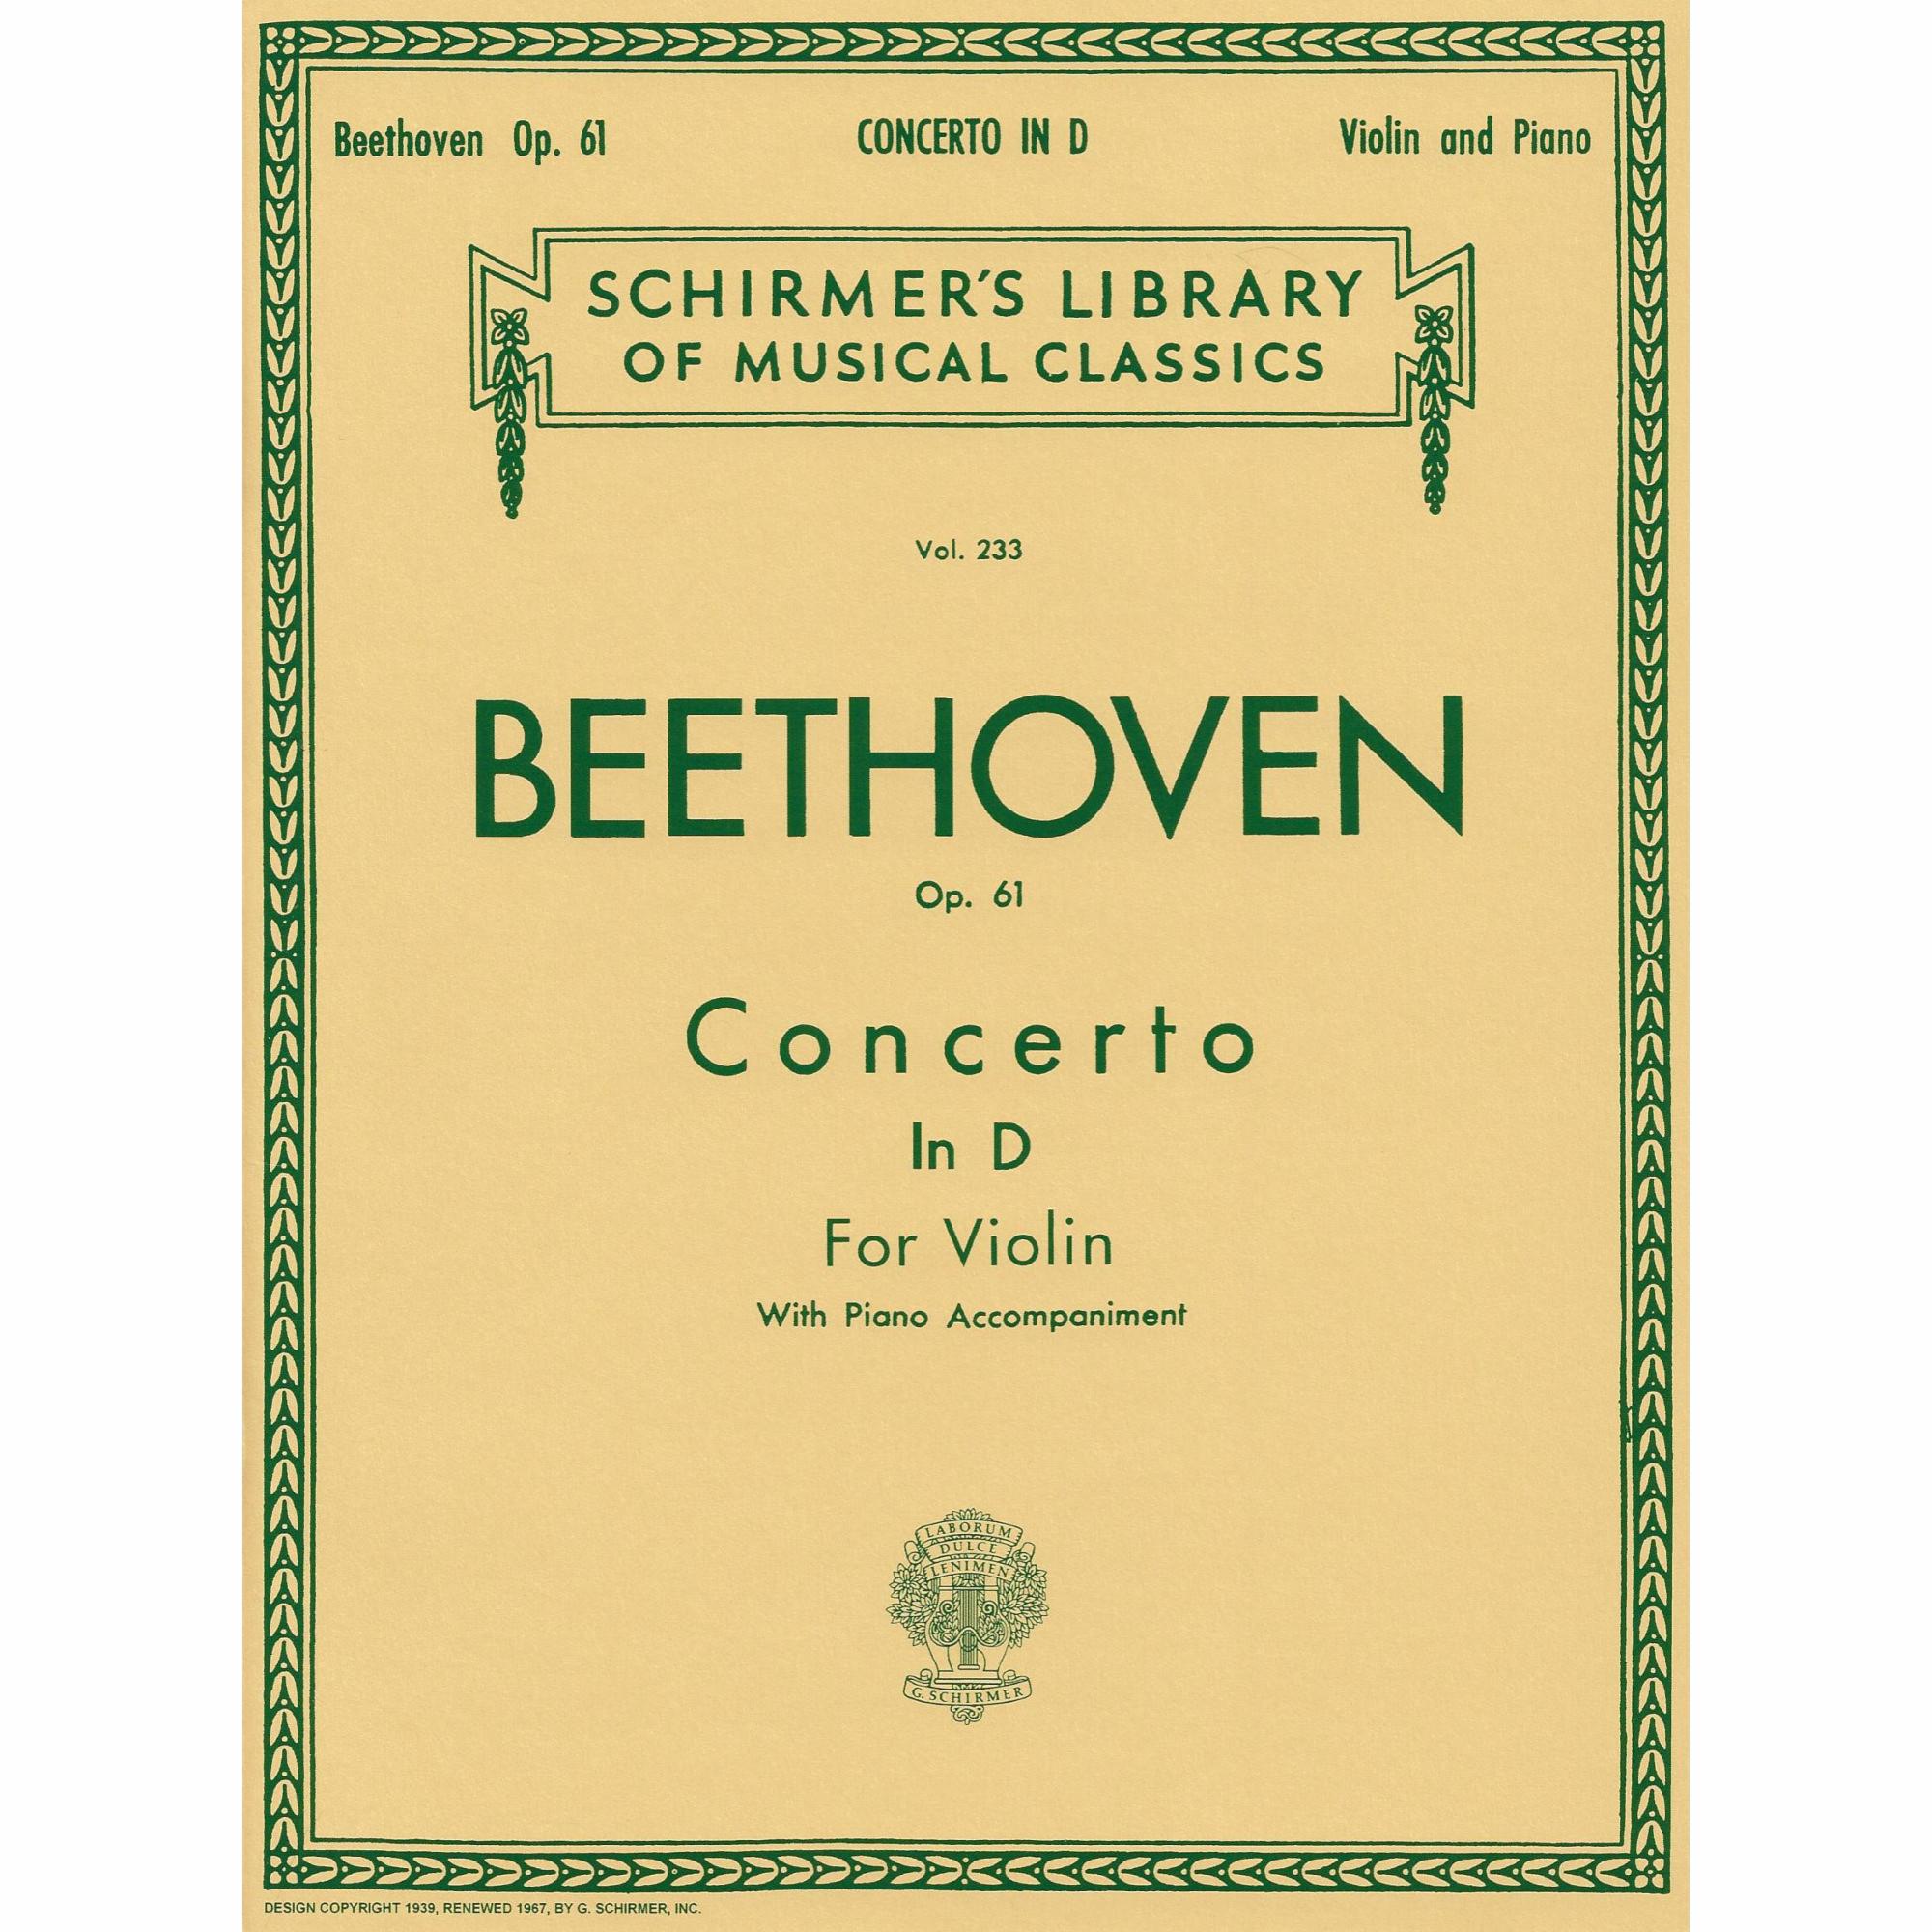 Beethoven -- Concerto in D Major, Op. 61 for Violin and Piano